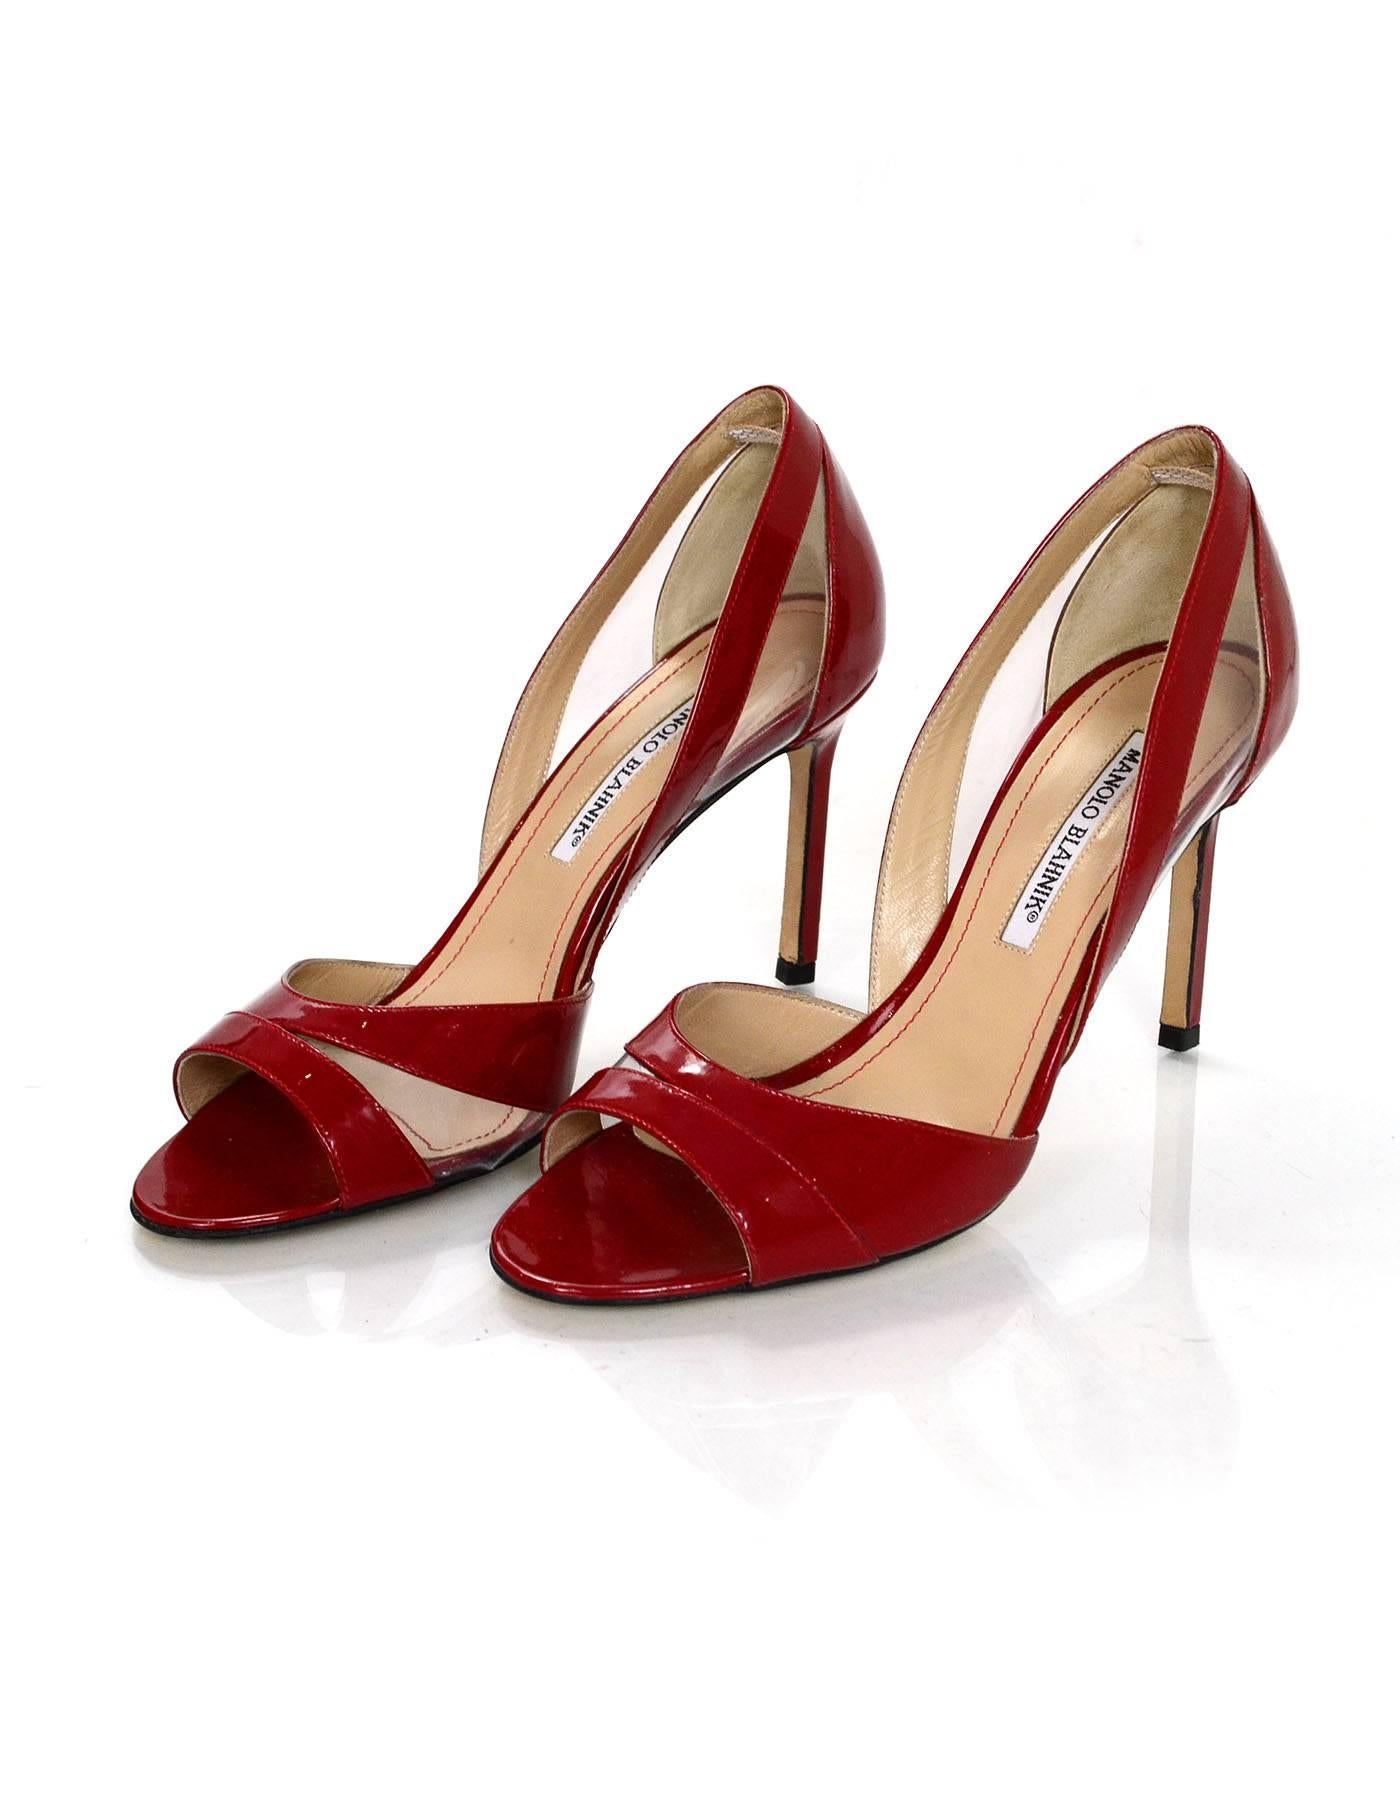 Manolo Blahnik Red Patent Open-Toe d'Orsay Pumps Sz 38

Features PVC sides

Made In: Italy
Color: Red
Materials: Patent leather
Closure/Opening: Slide on
Sole Stamp: Manolo Blahnik Made in Italy 38
Overall Condition: Excellent pre-owned condition